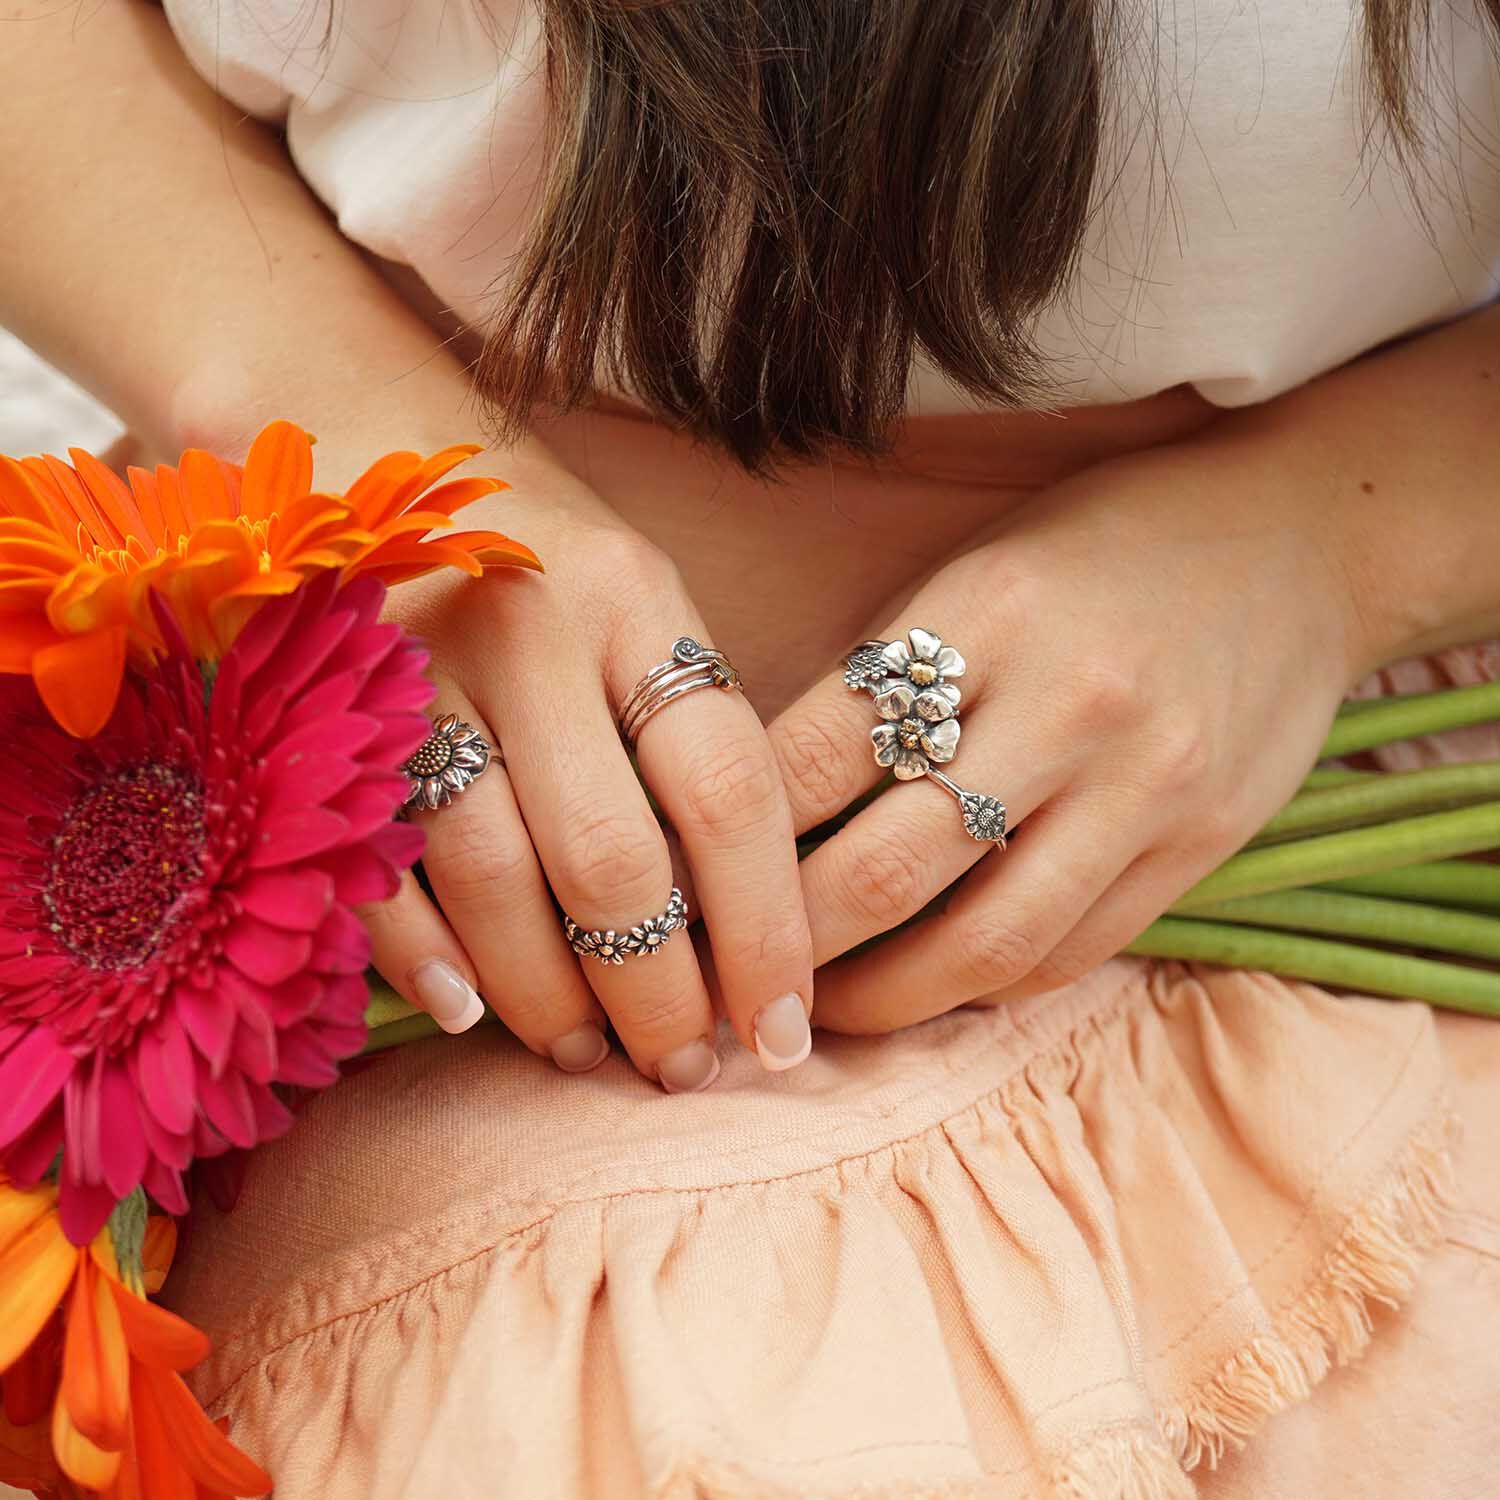 Hand holding flowers and wearing sterling silver rings from James Avery.